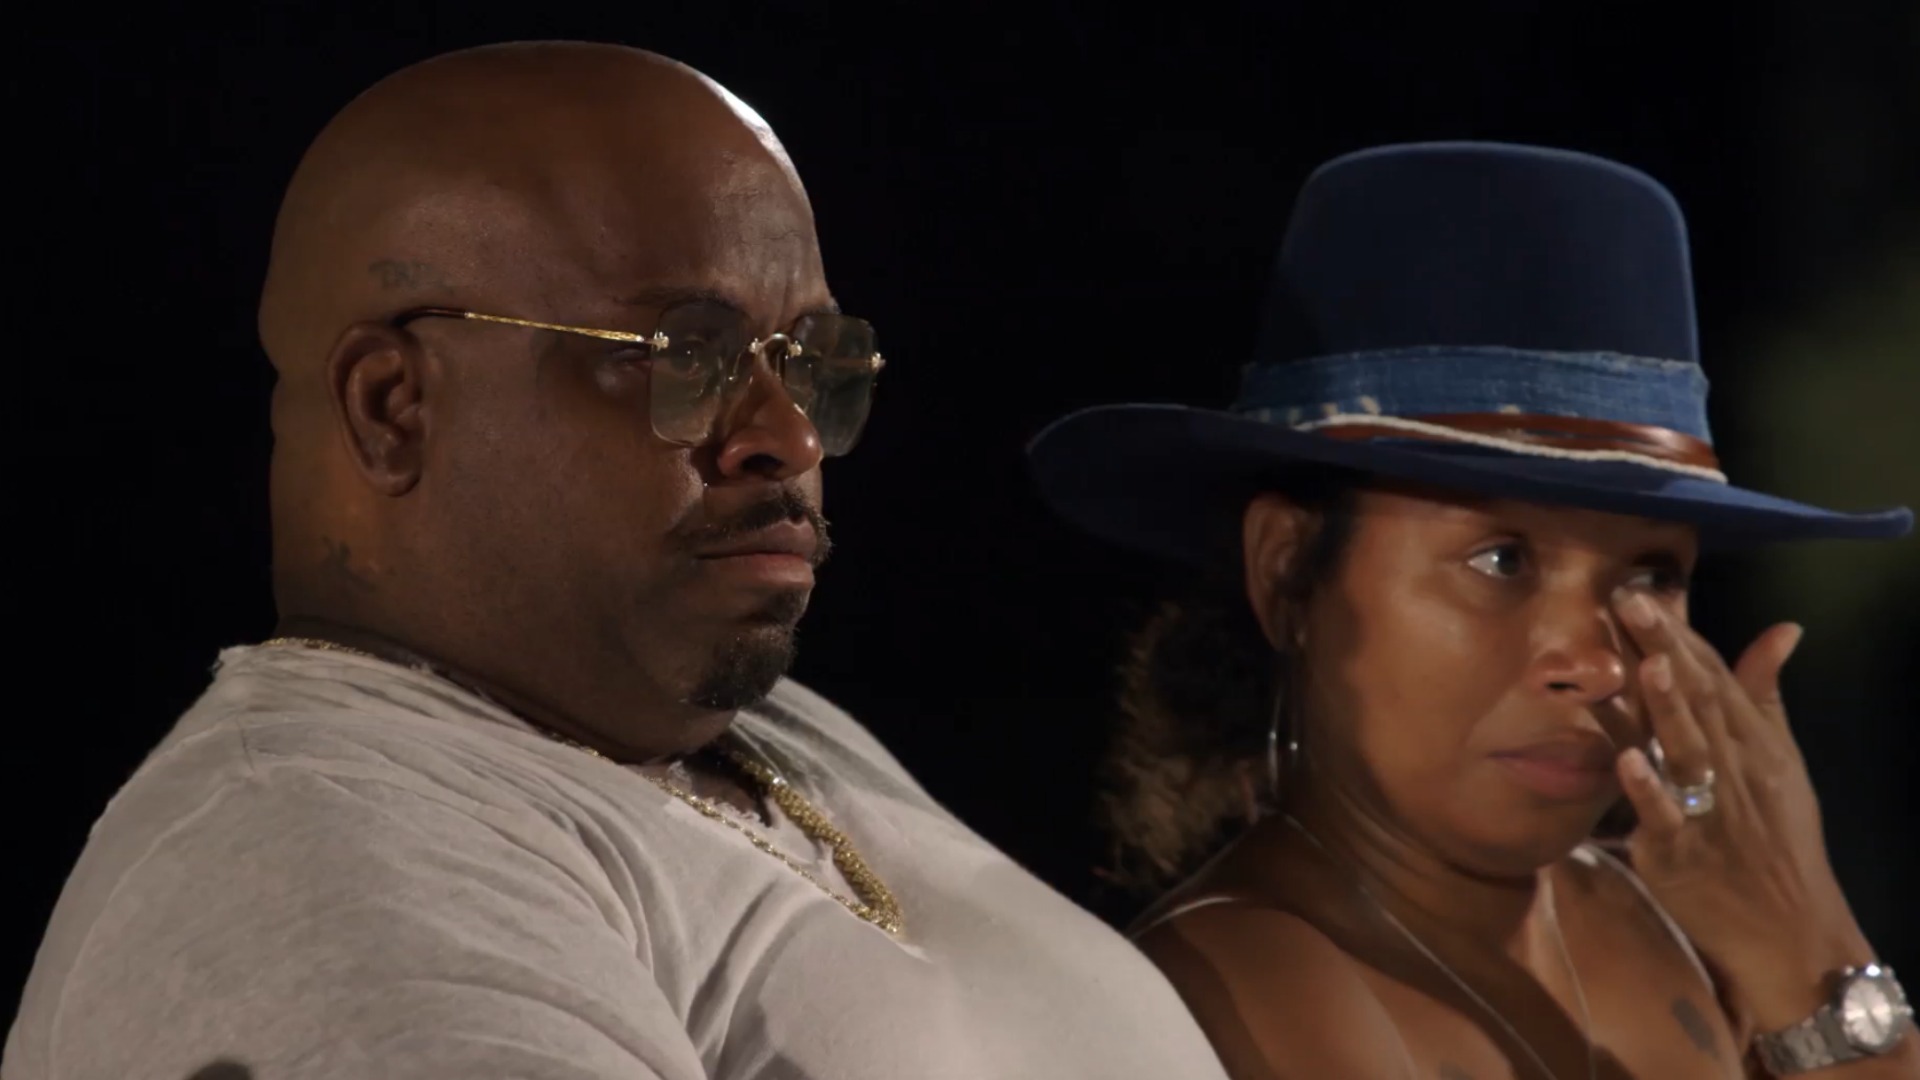 Watch Sneak Peek: #HipHopBootCamp Is Getting Intense! | Marriage Boot Camp: Hip Hop Edition Video Extras